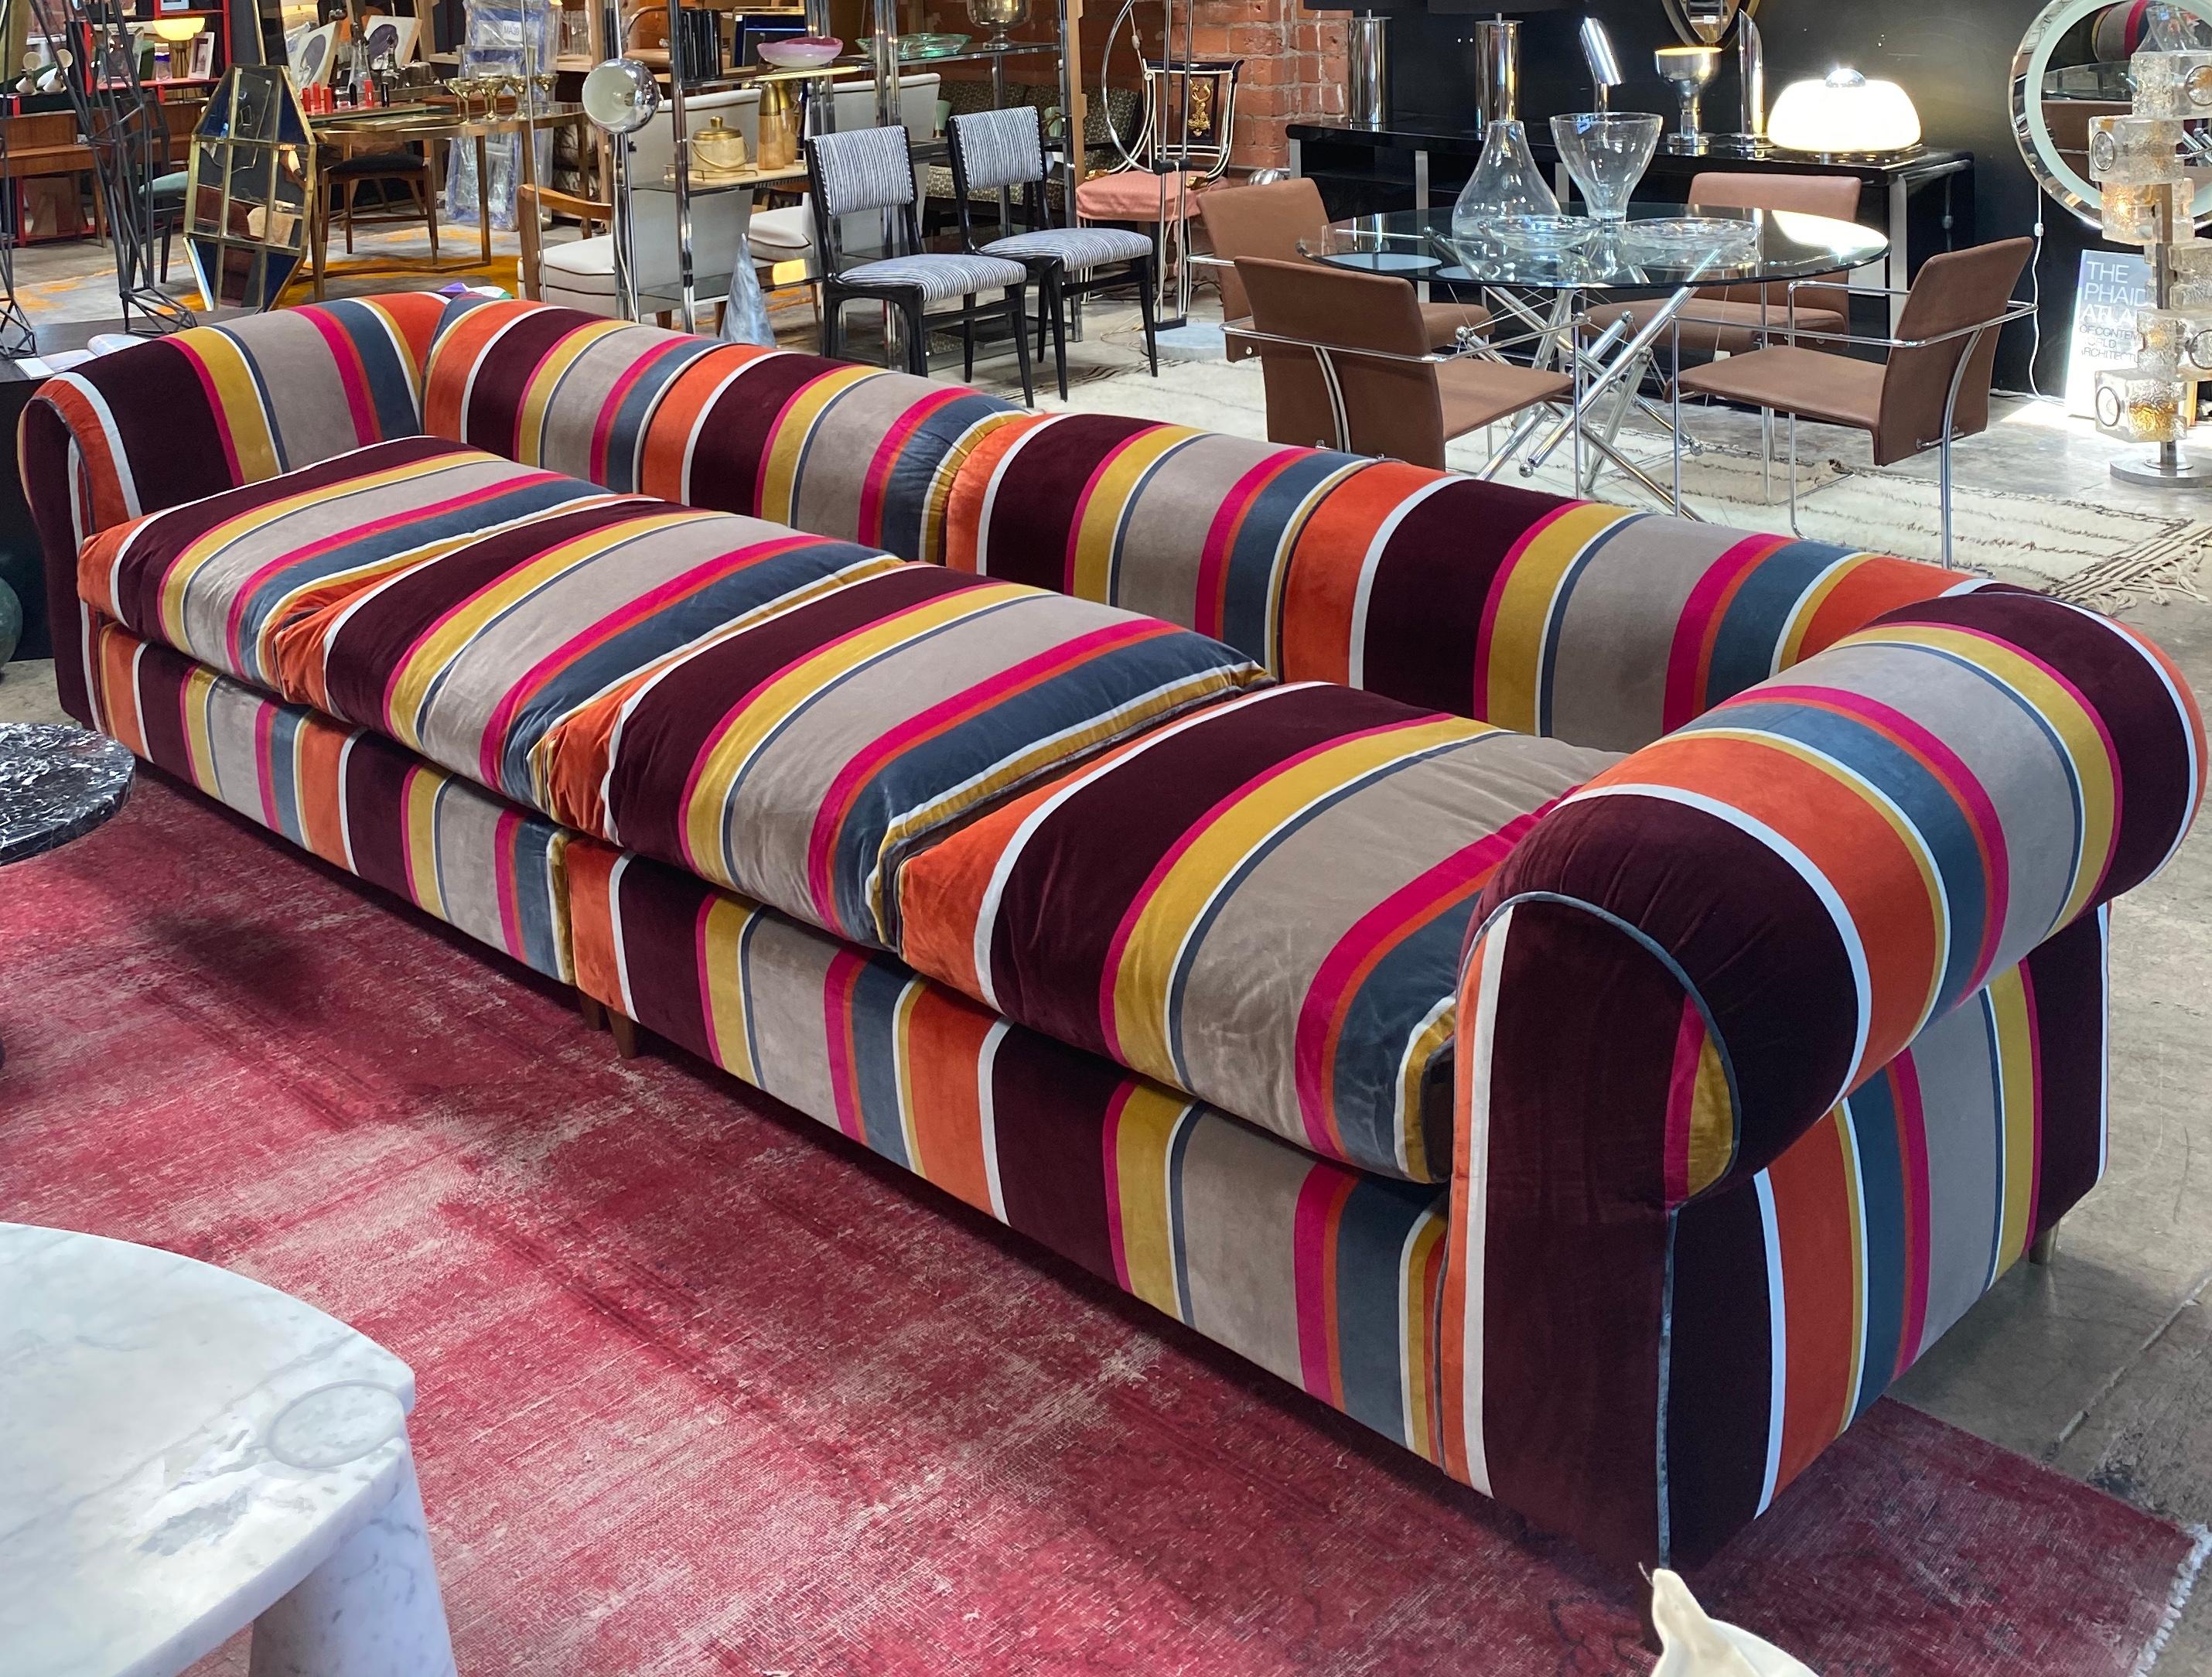 Reupholstered with a original printed velvet fabric whose colorful and abstract pattern evokes the lively charm of the 1980s, this stunning sofa boasts a unique silhouette to match any decor.